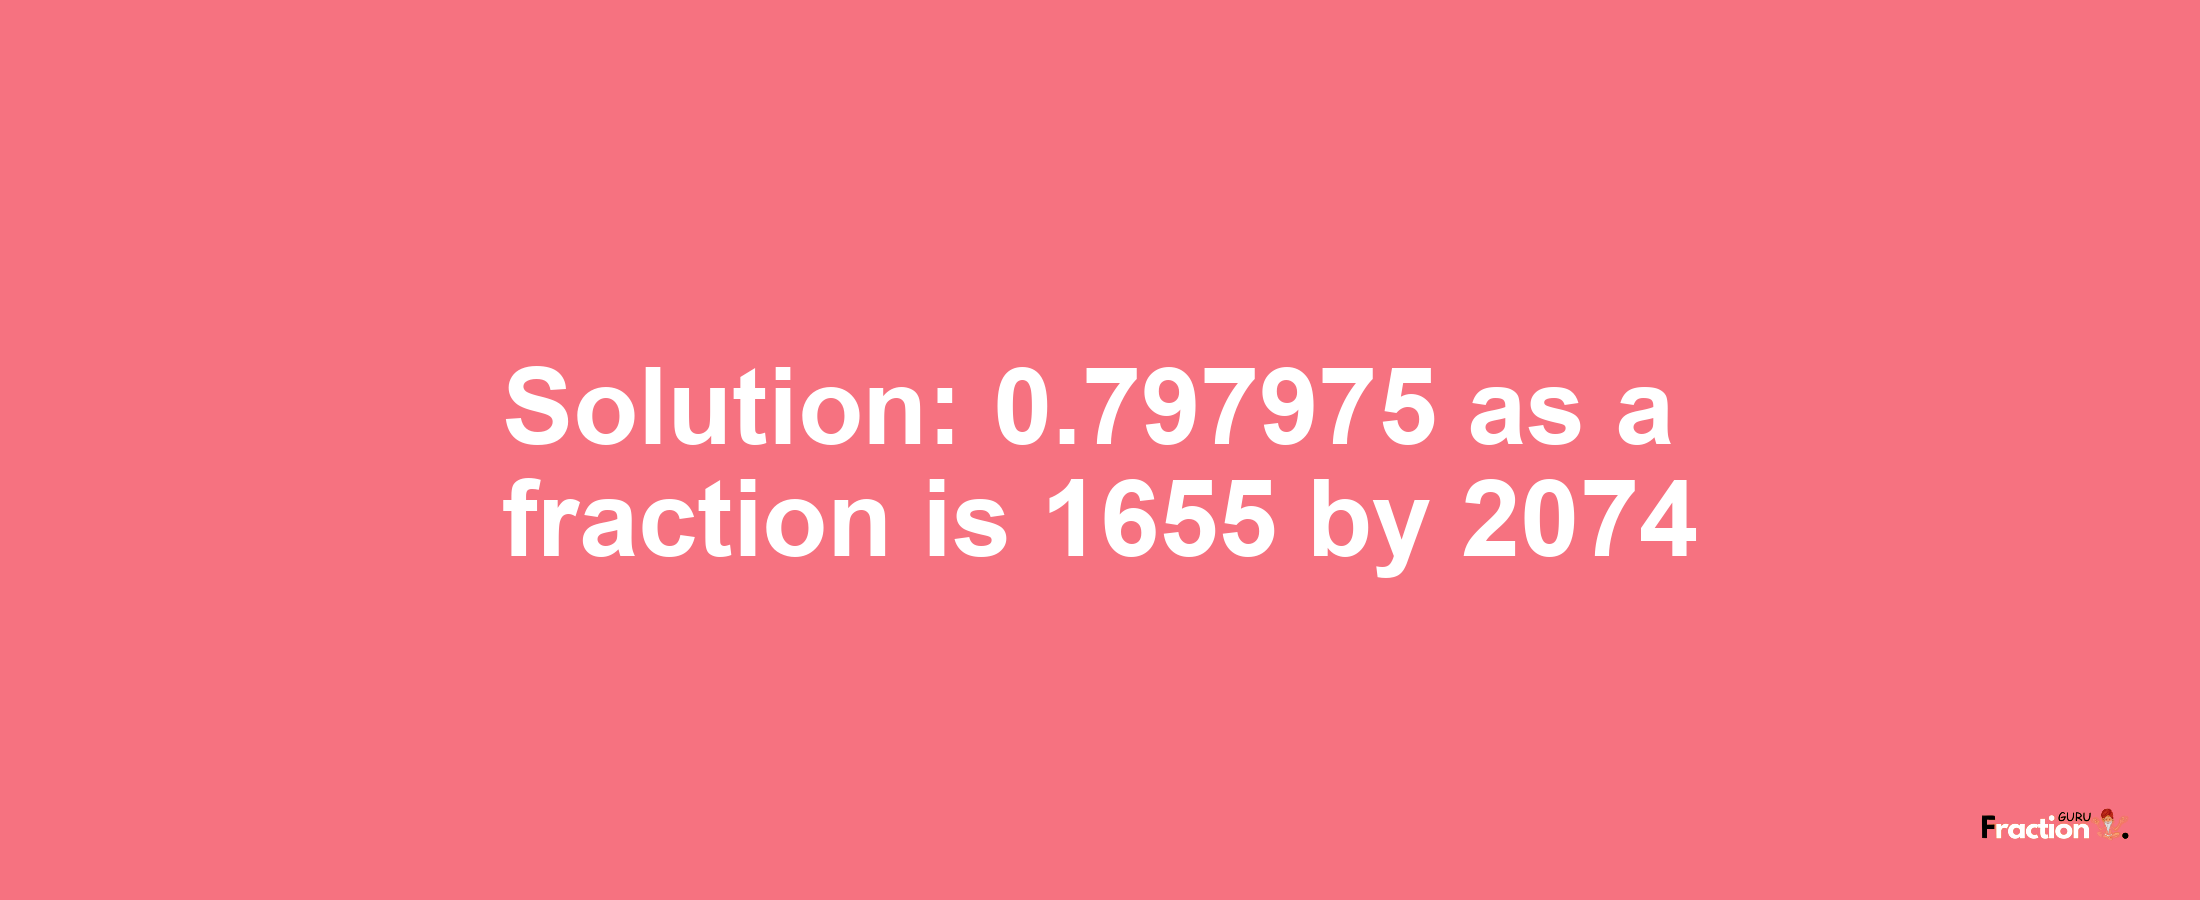 Solution:0.797975 as a fraction is 1655/2074